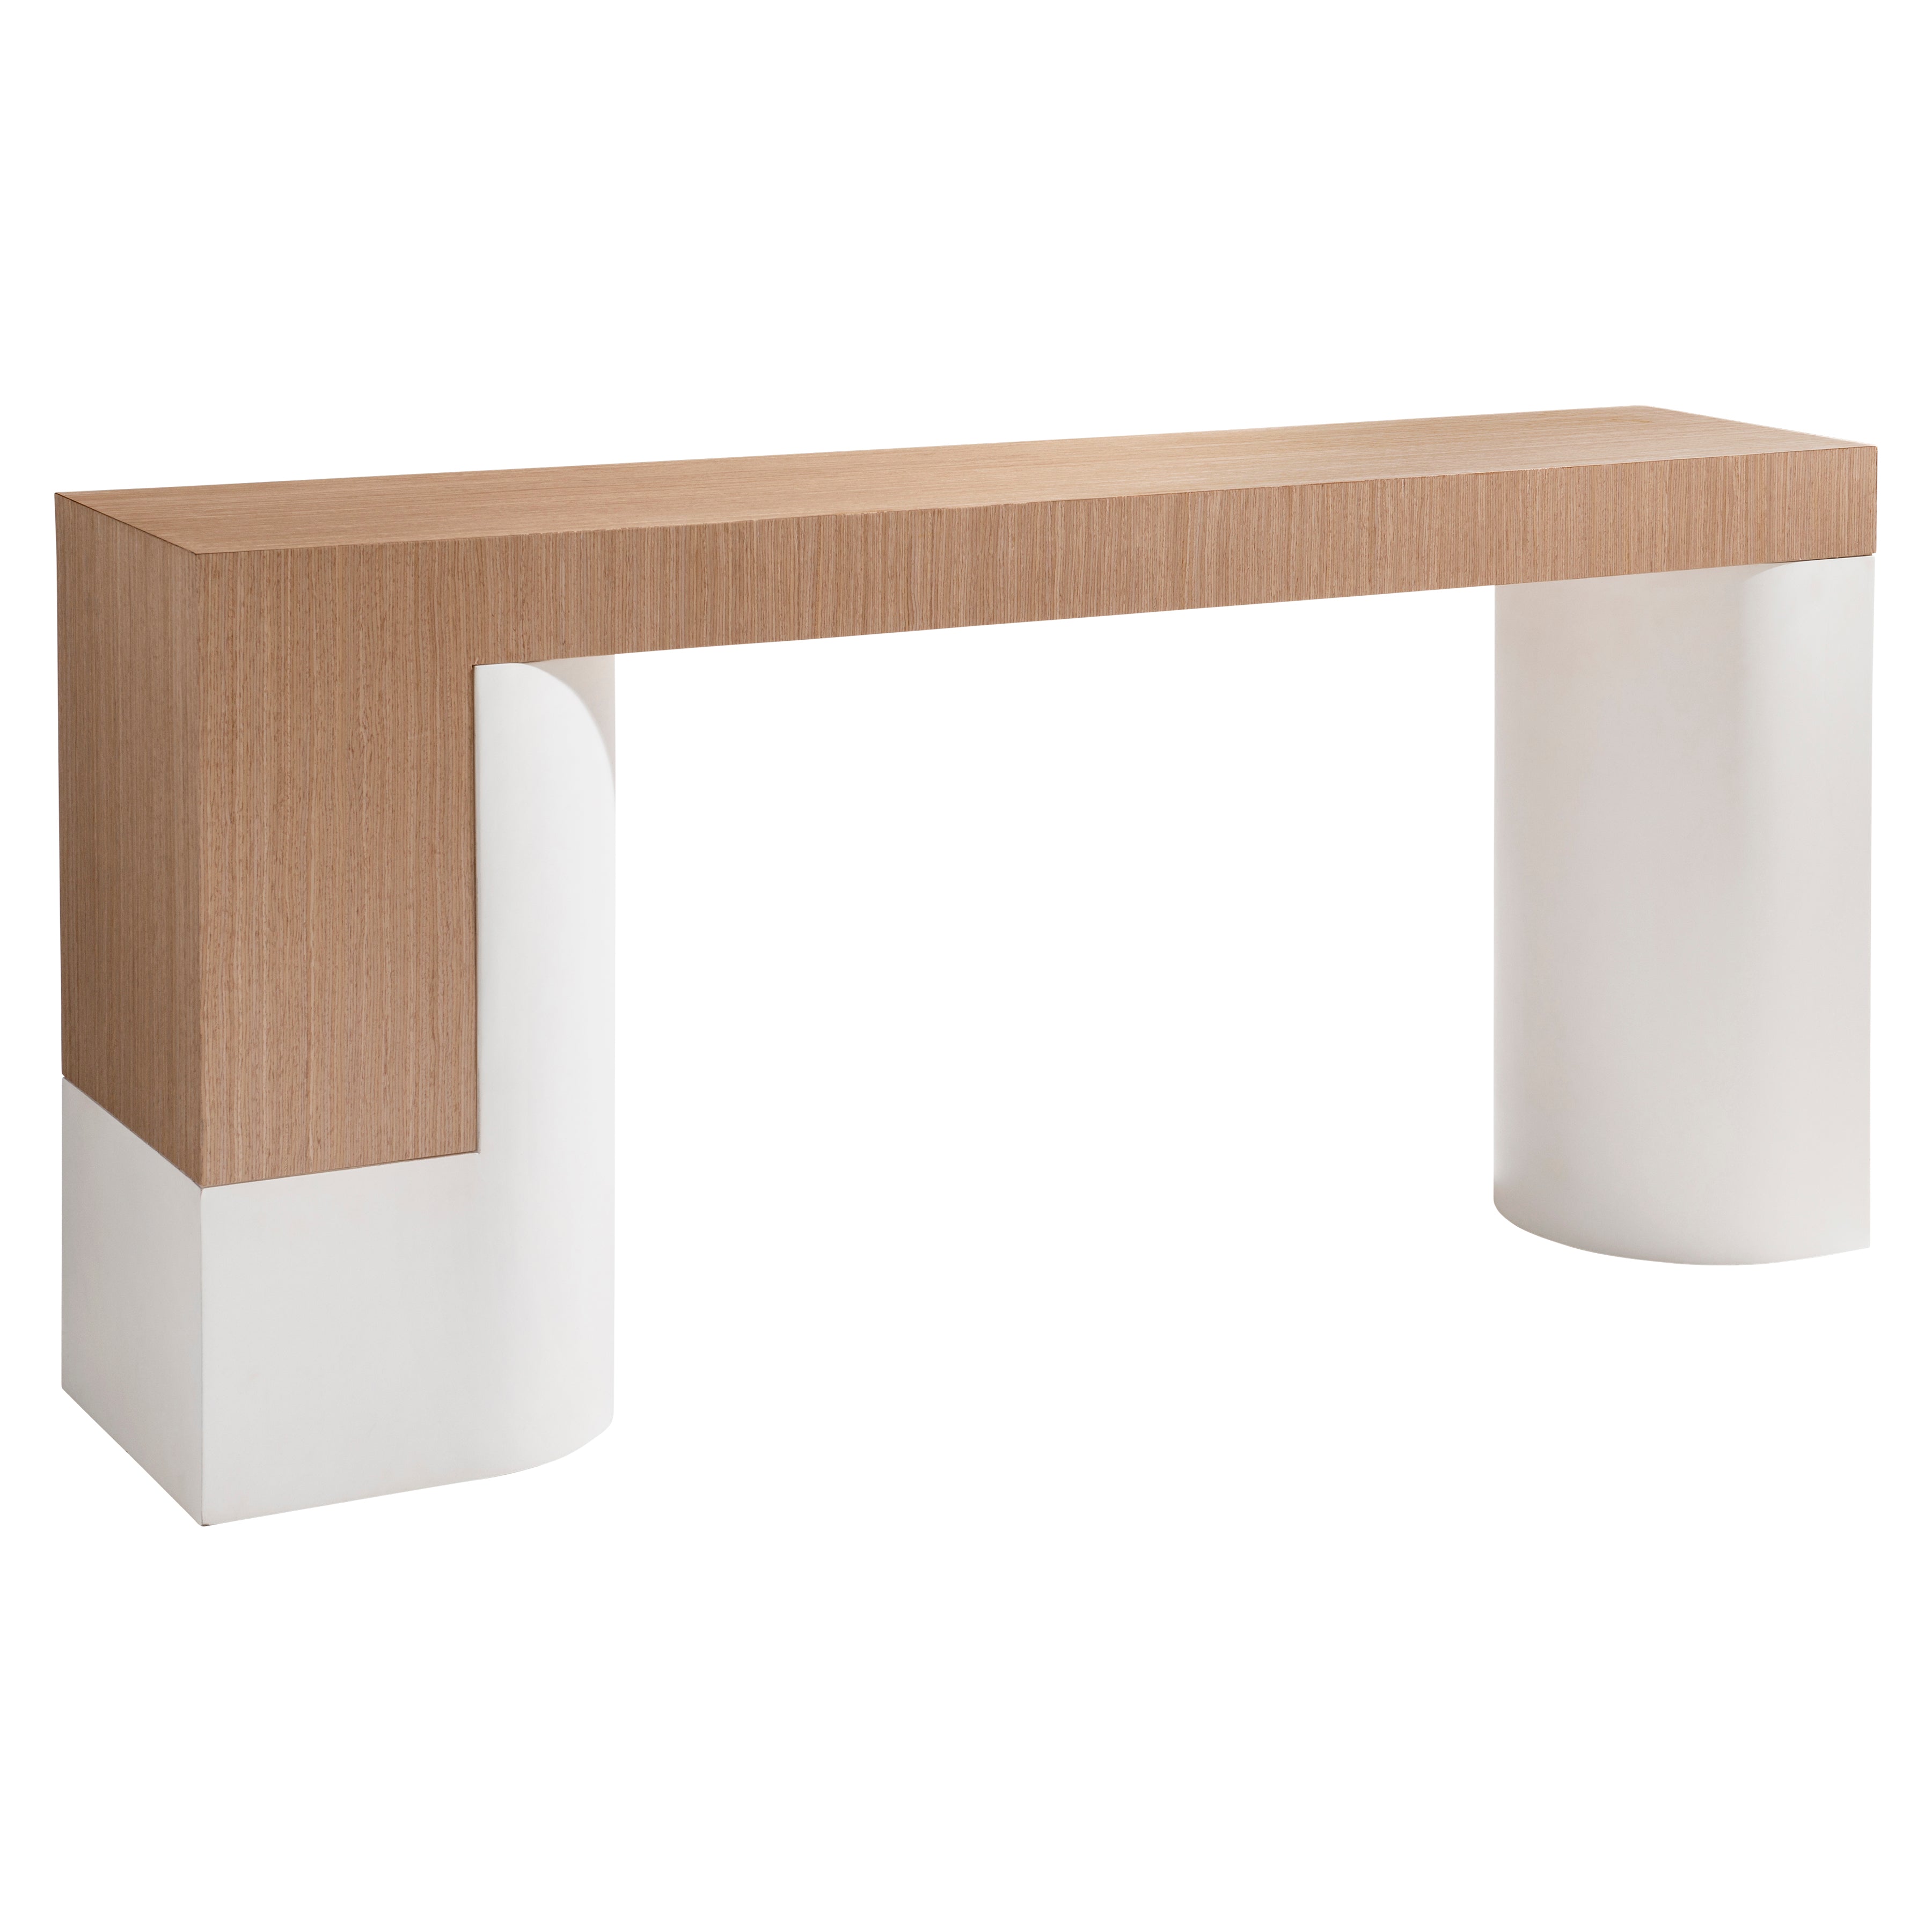 Modulum Console Table with 2 Pedestal Bases